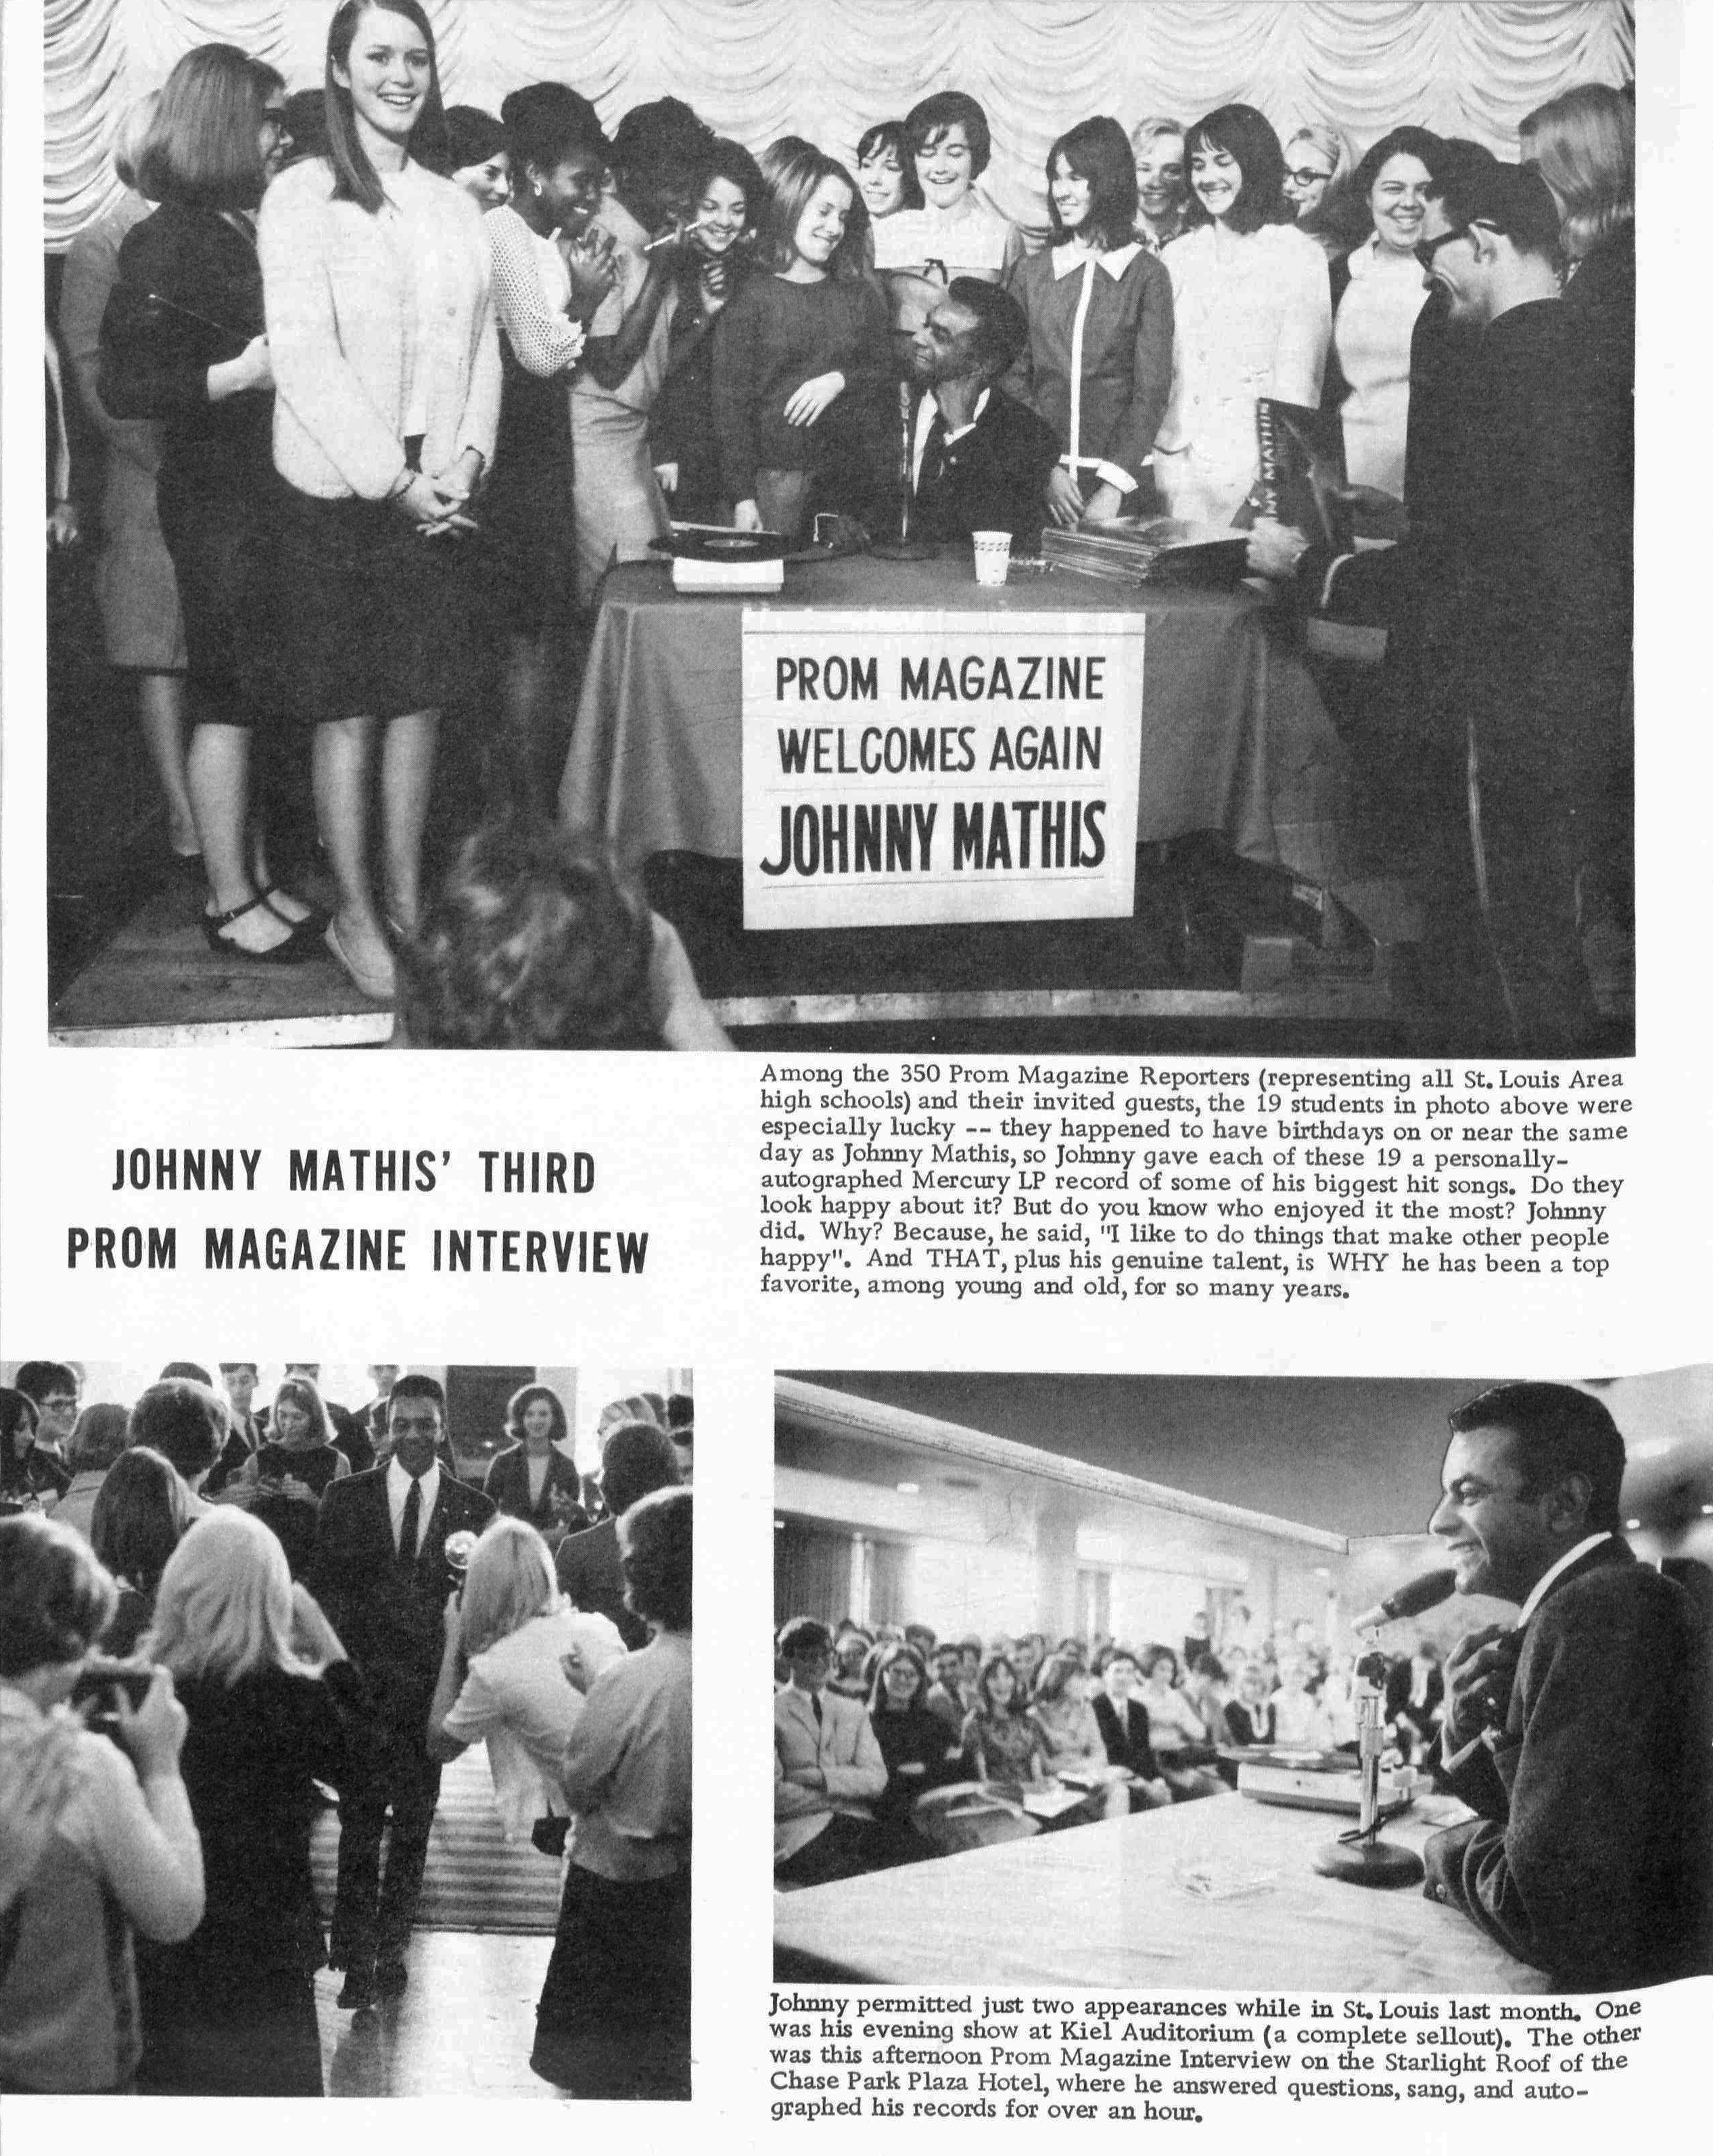 The Prom Magazine Interview with Johnny Mathis was a sensation!! PROM MAGAZINE DECEMBER 1966